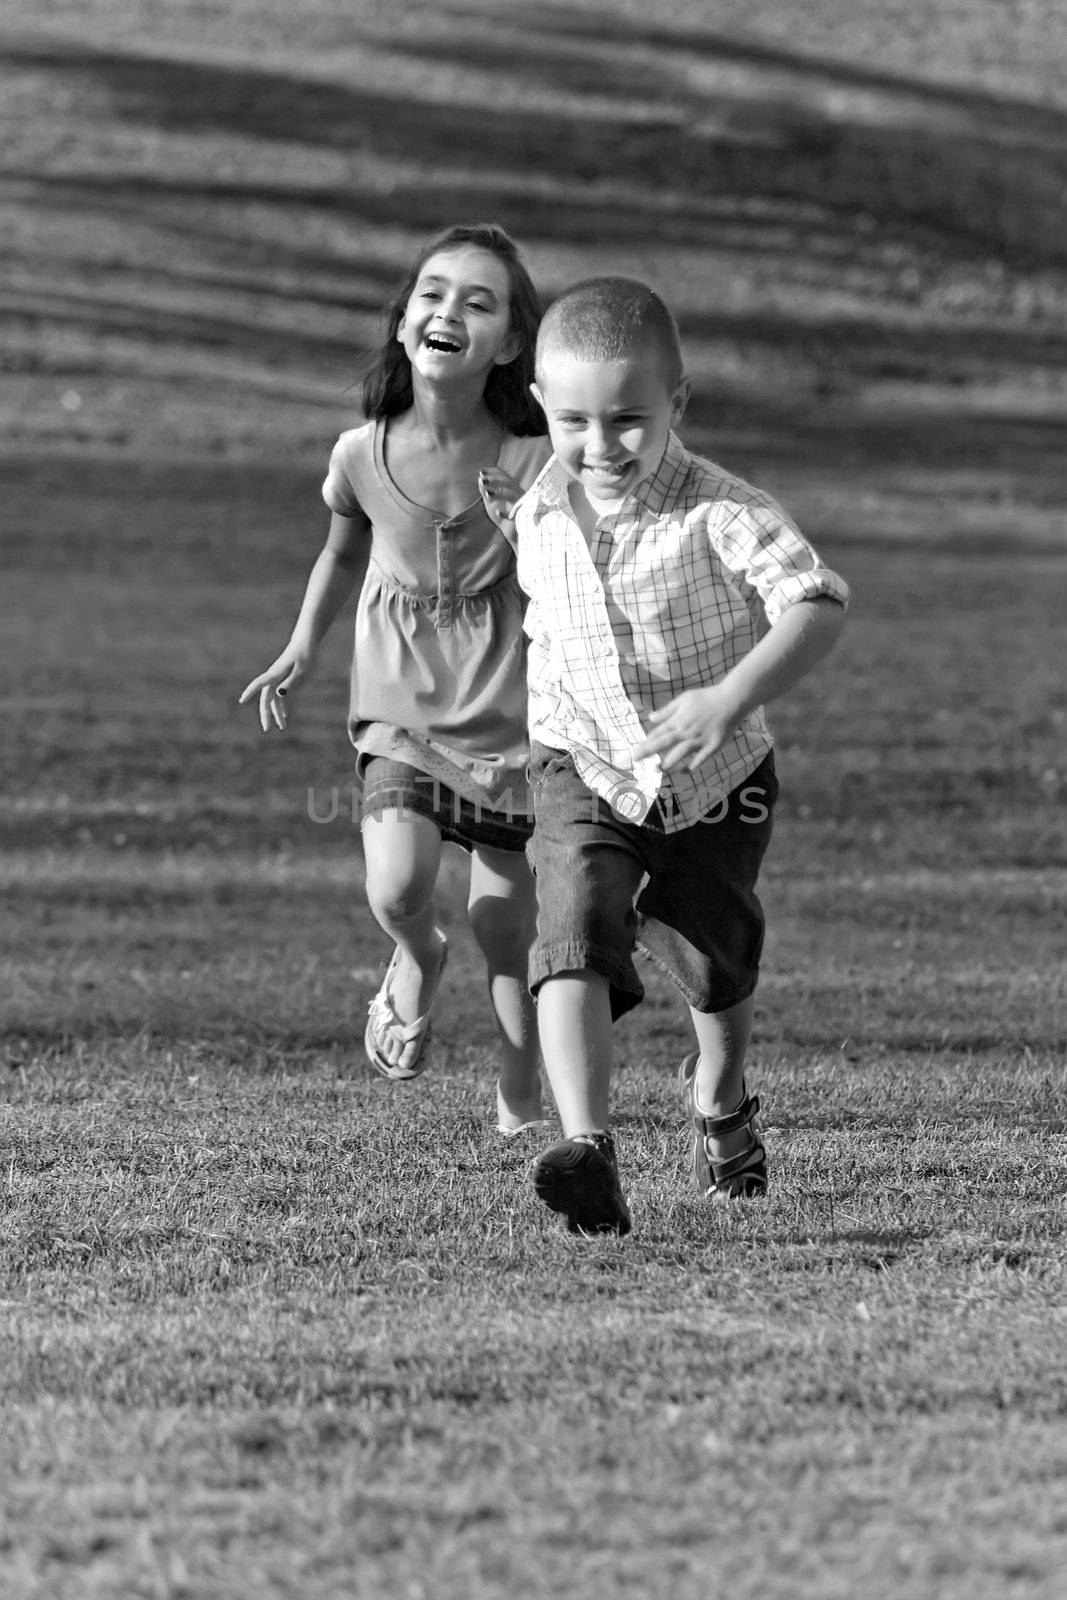 A little boy and girl laughing and running through the grassy field in black and white.